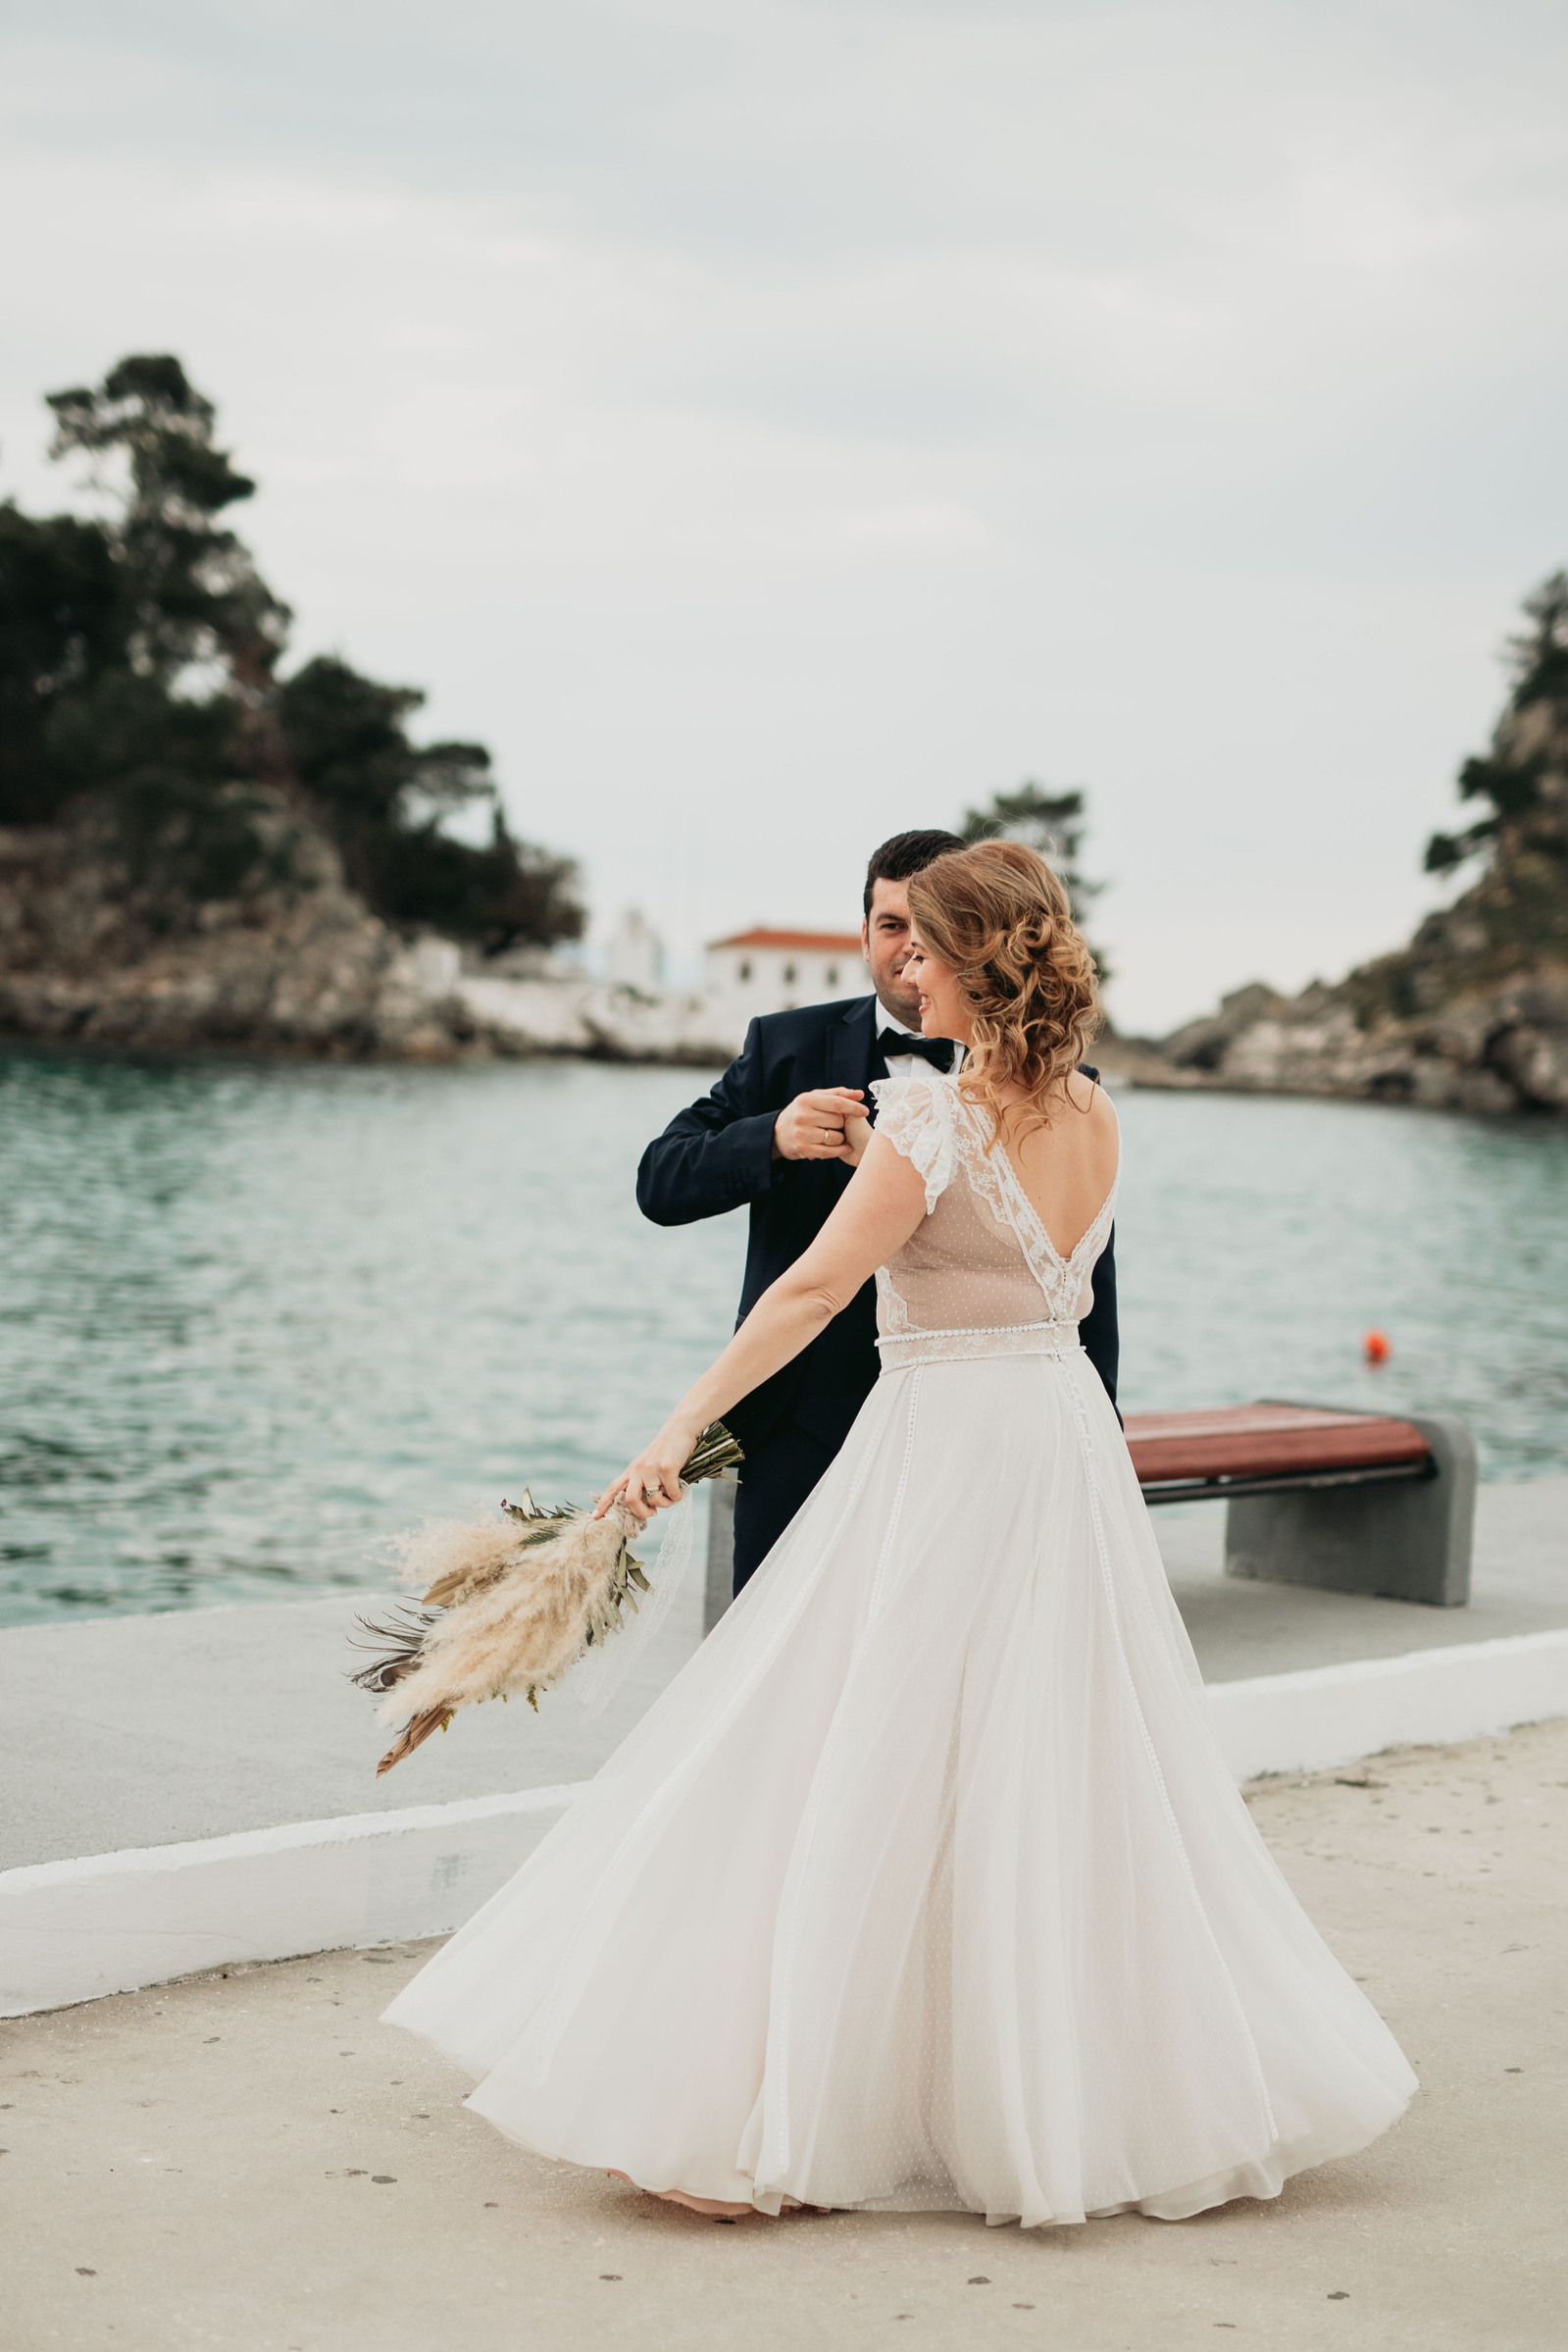 Elopement photography from Parga in Greece. A dancing couple in front of the white little church, by the water of the Ionian Sea.